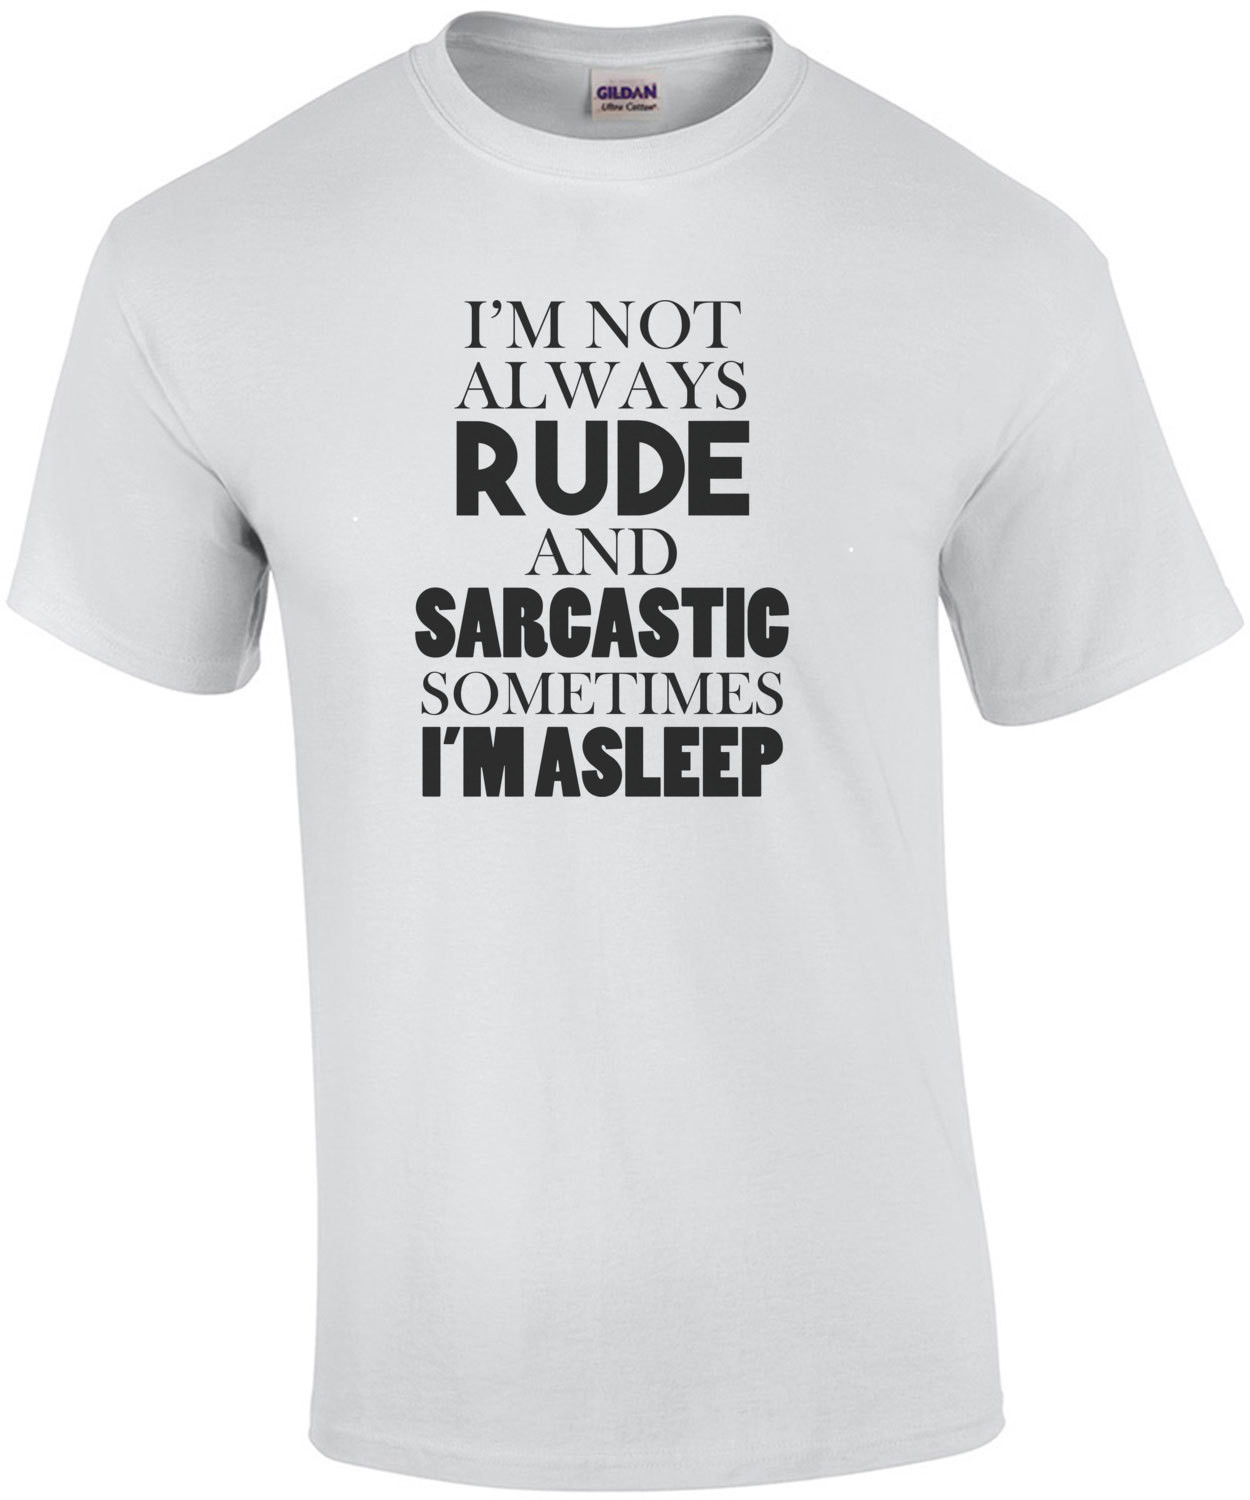 I'm not always rude and sarcastic sometimes I'm asleep